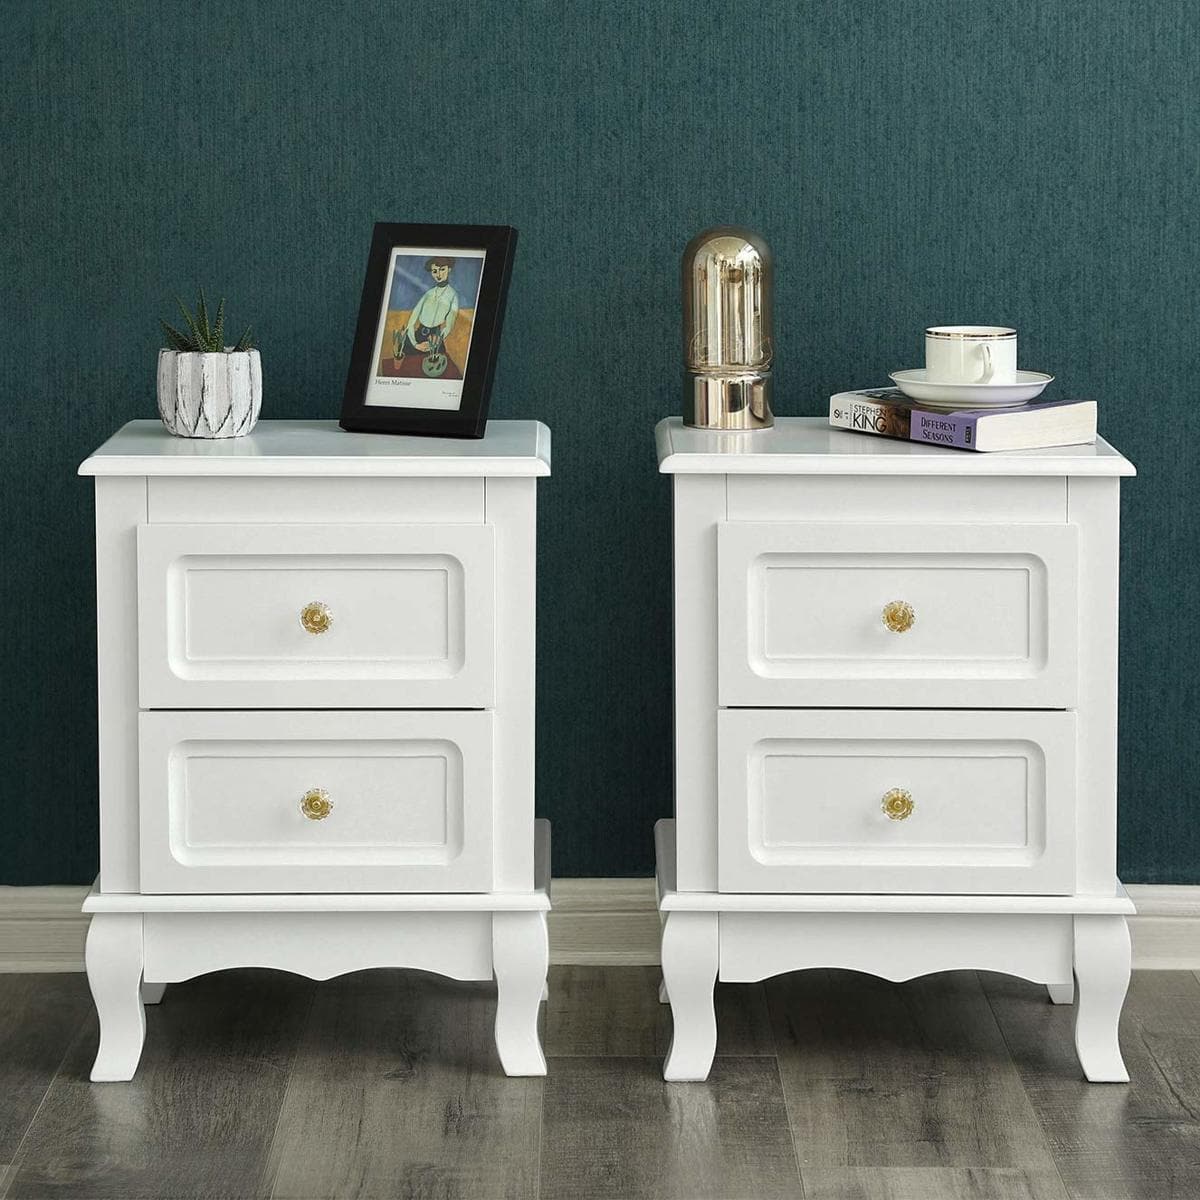 Nancy's Bannockburn Bedside Tables Set of 2 with 2 Drawers, Transparent Handles with Solid Pine Legs